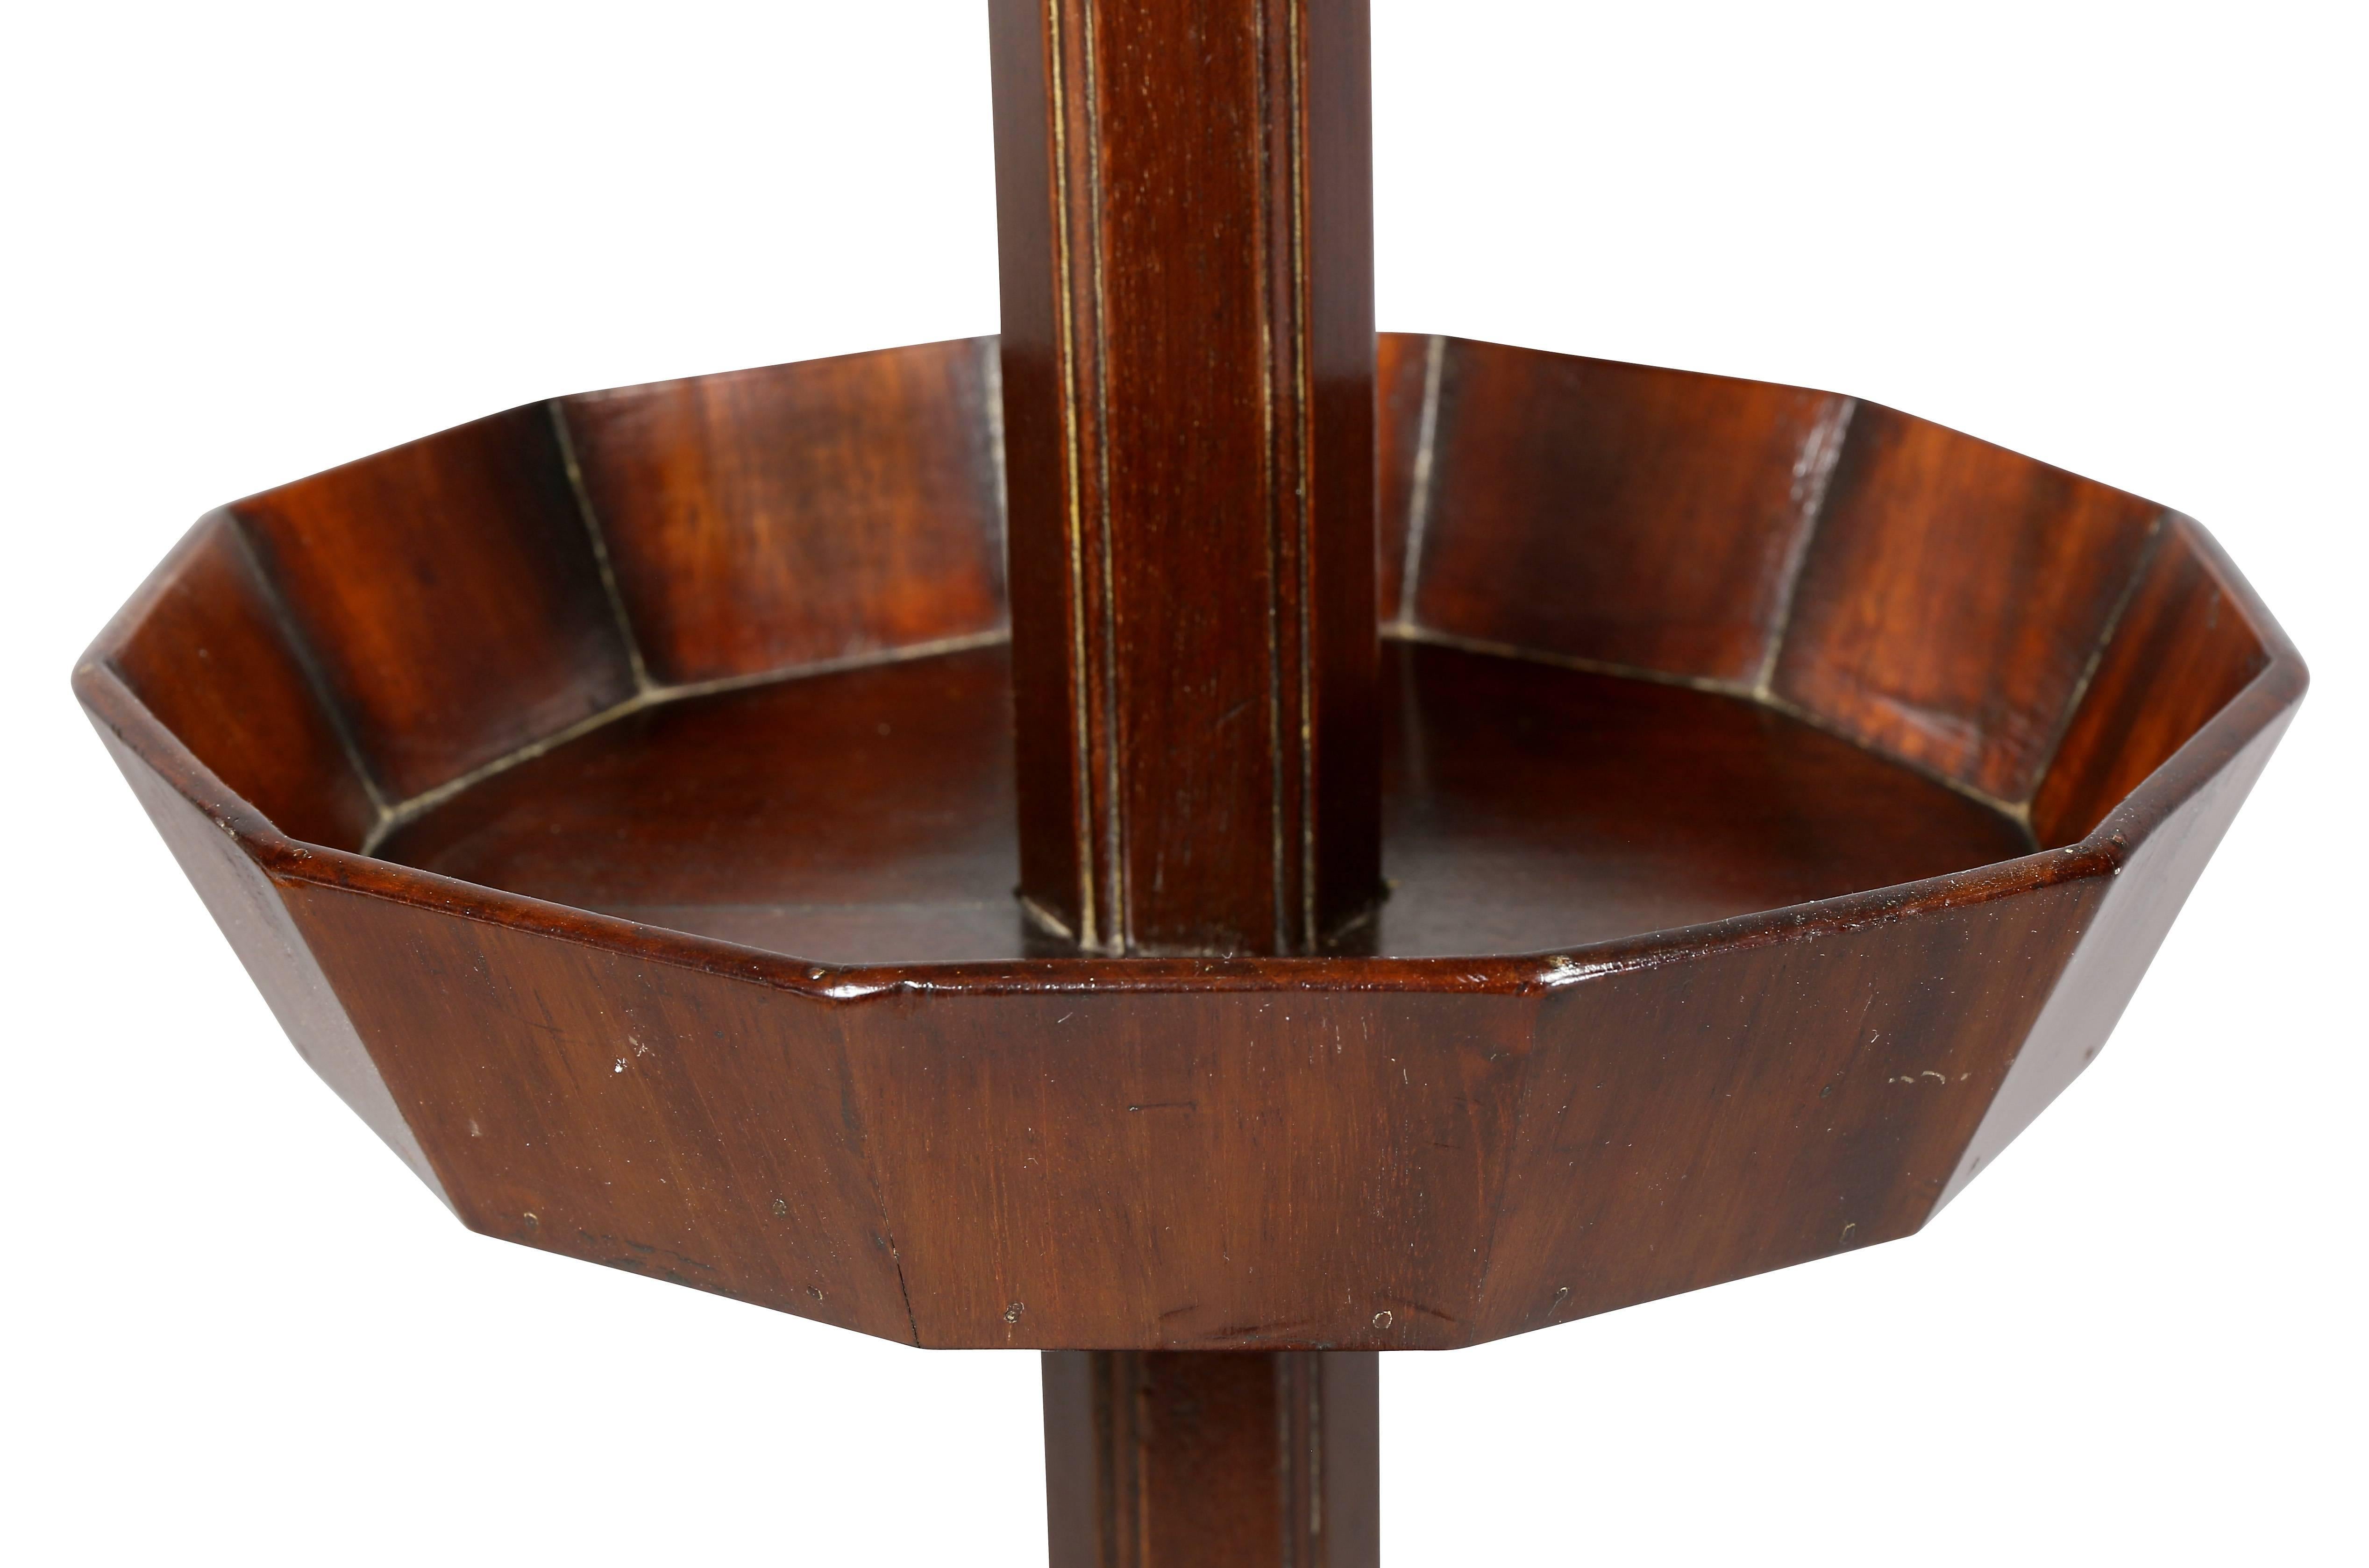 Louis XVI Mahogany and Brass-Mounted Adjustable Candle Stand by Bailly 1